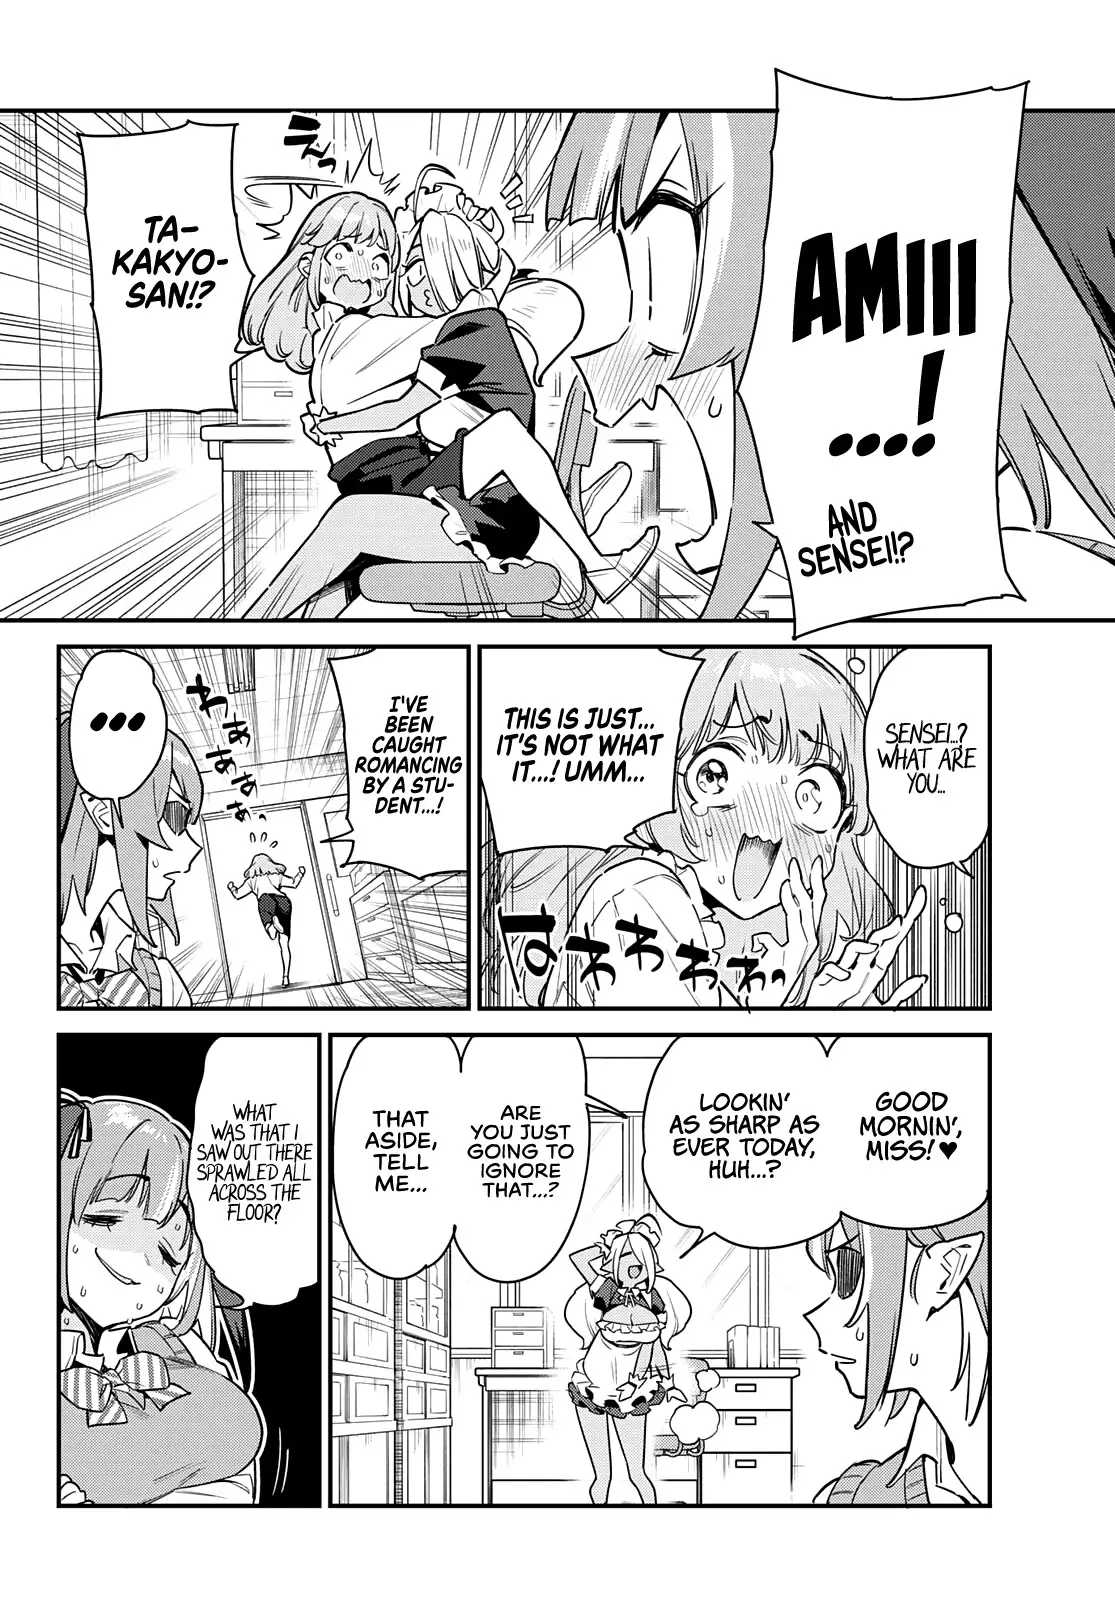 Kanan-Sama Is Easy As Hell! - 9 page 3-67317d82